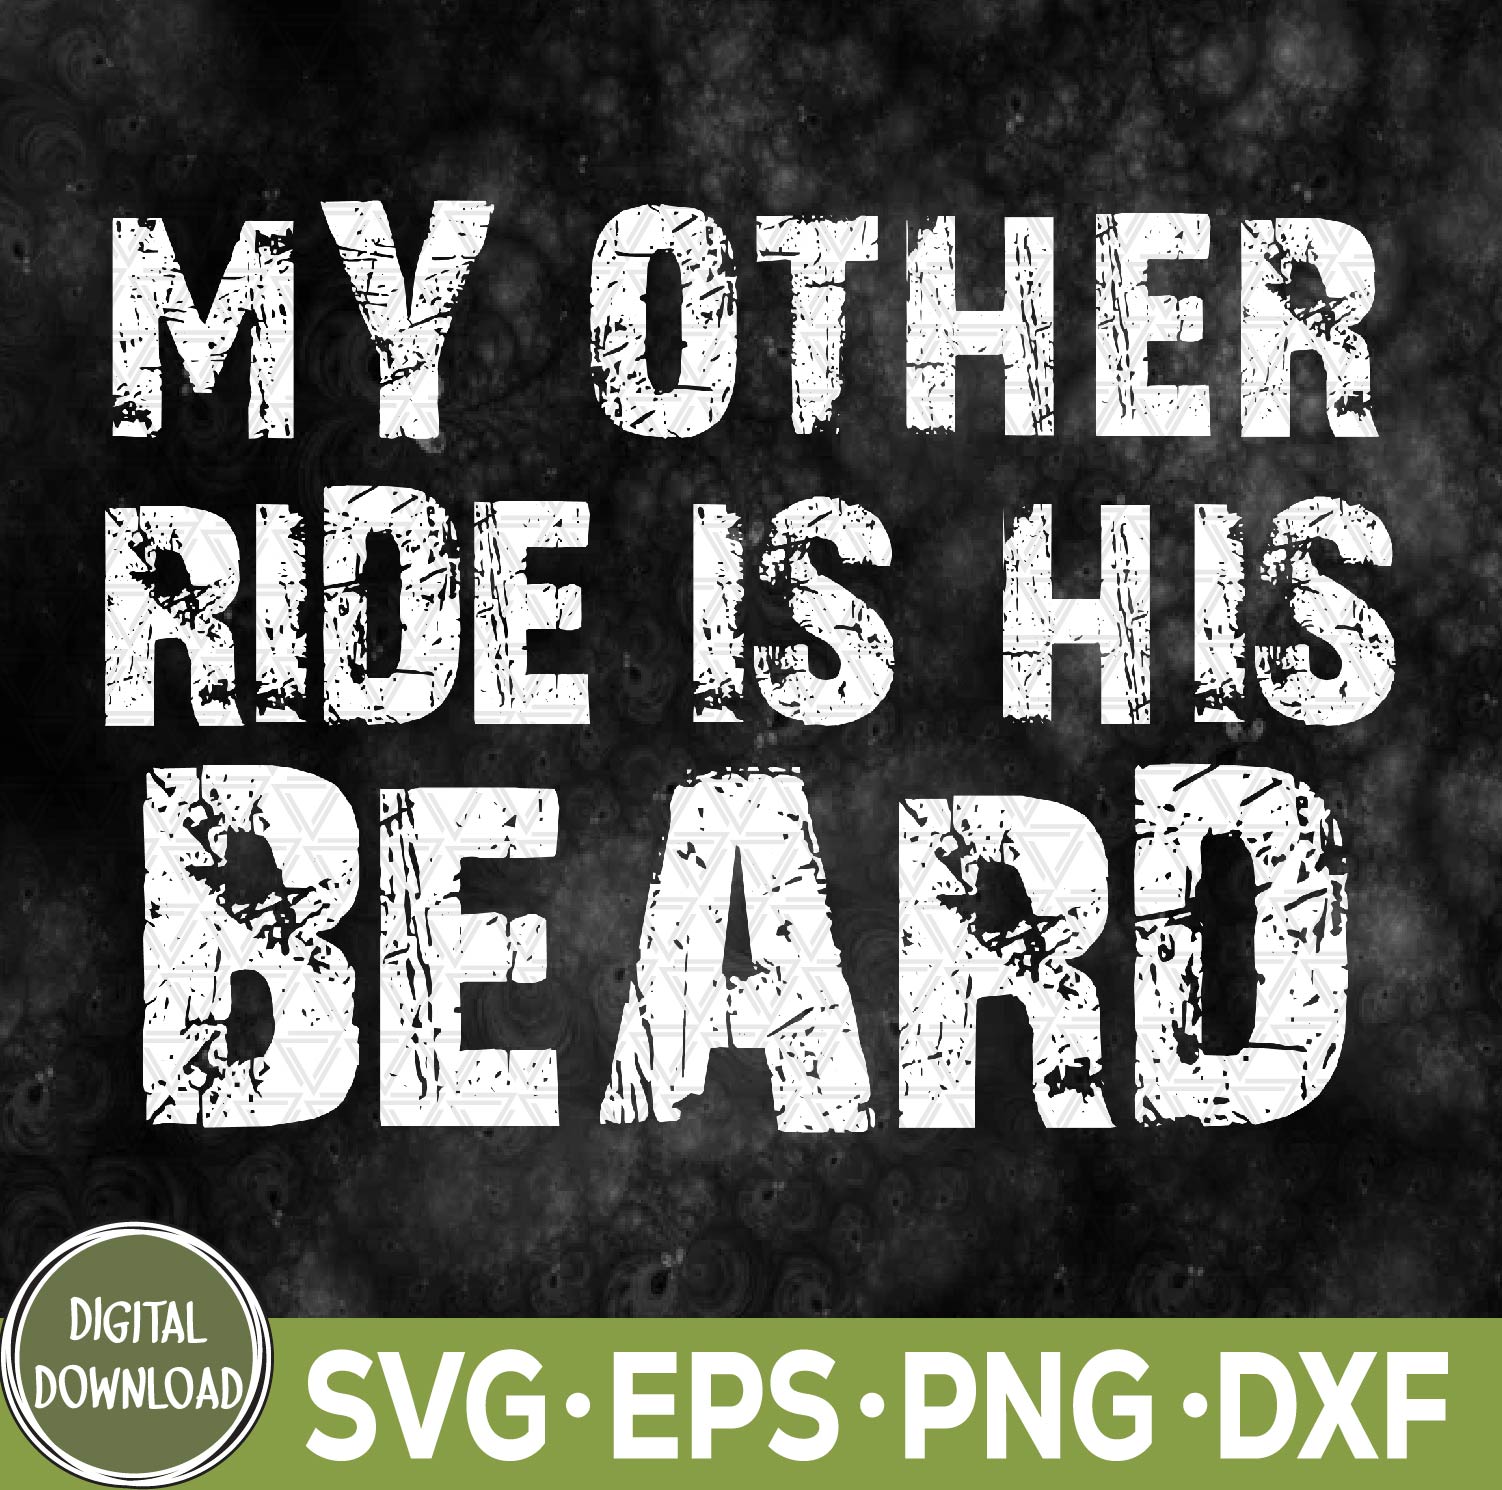 WTMNEW9file 09 39 My Other Ride Is His Beard On Back Svg, Eps, Png, Dxf